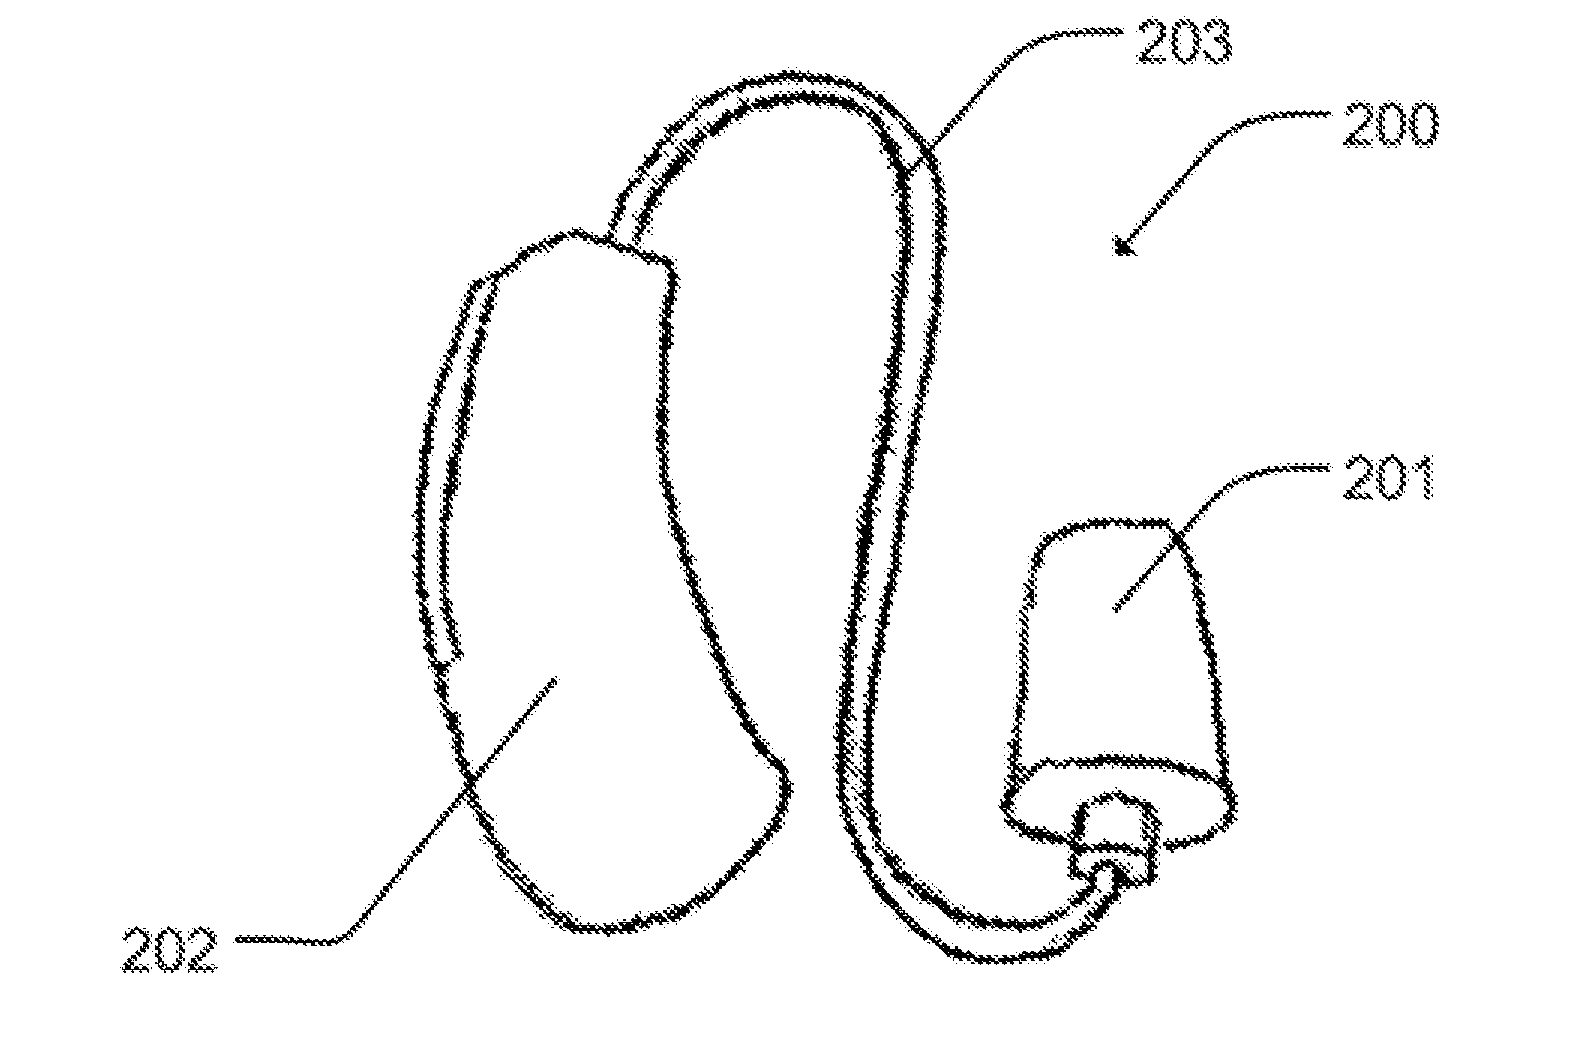 Storage system for a hearing aid